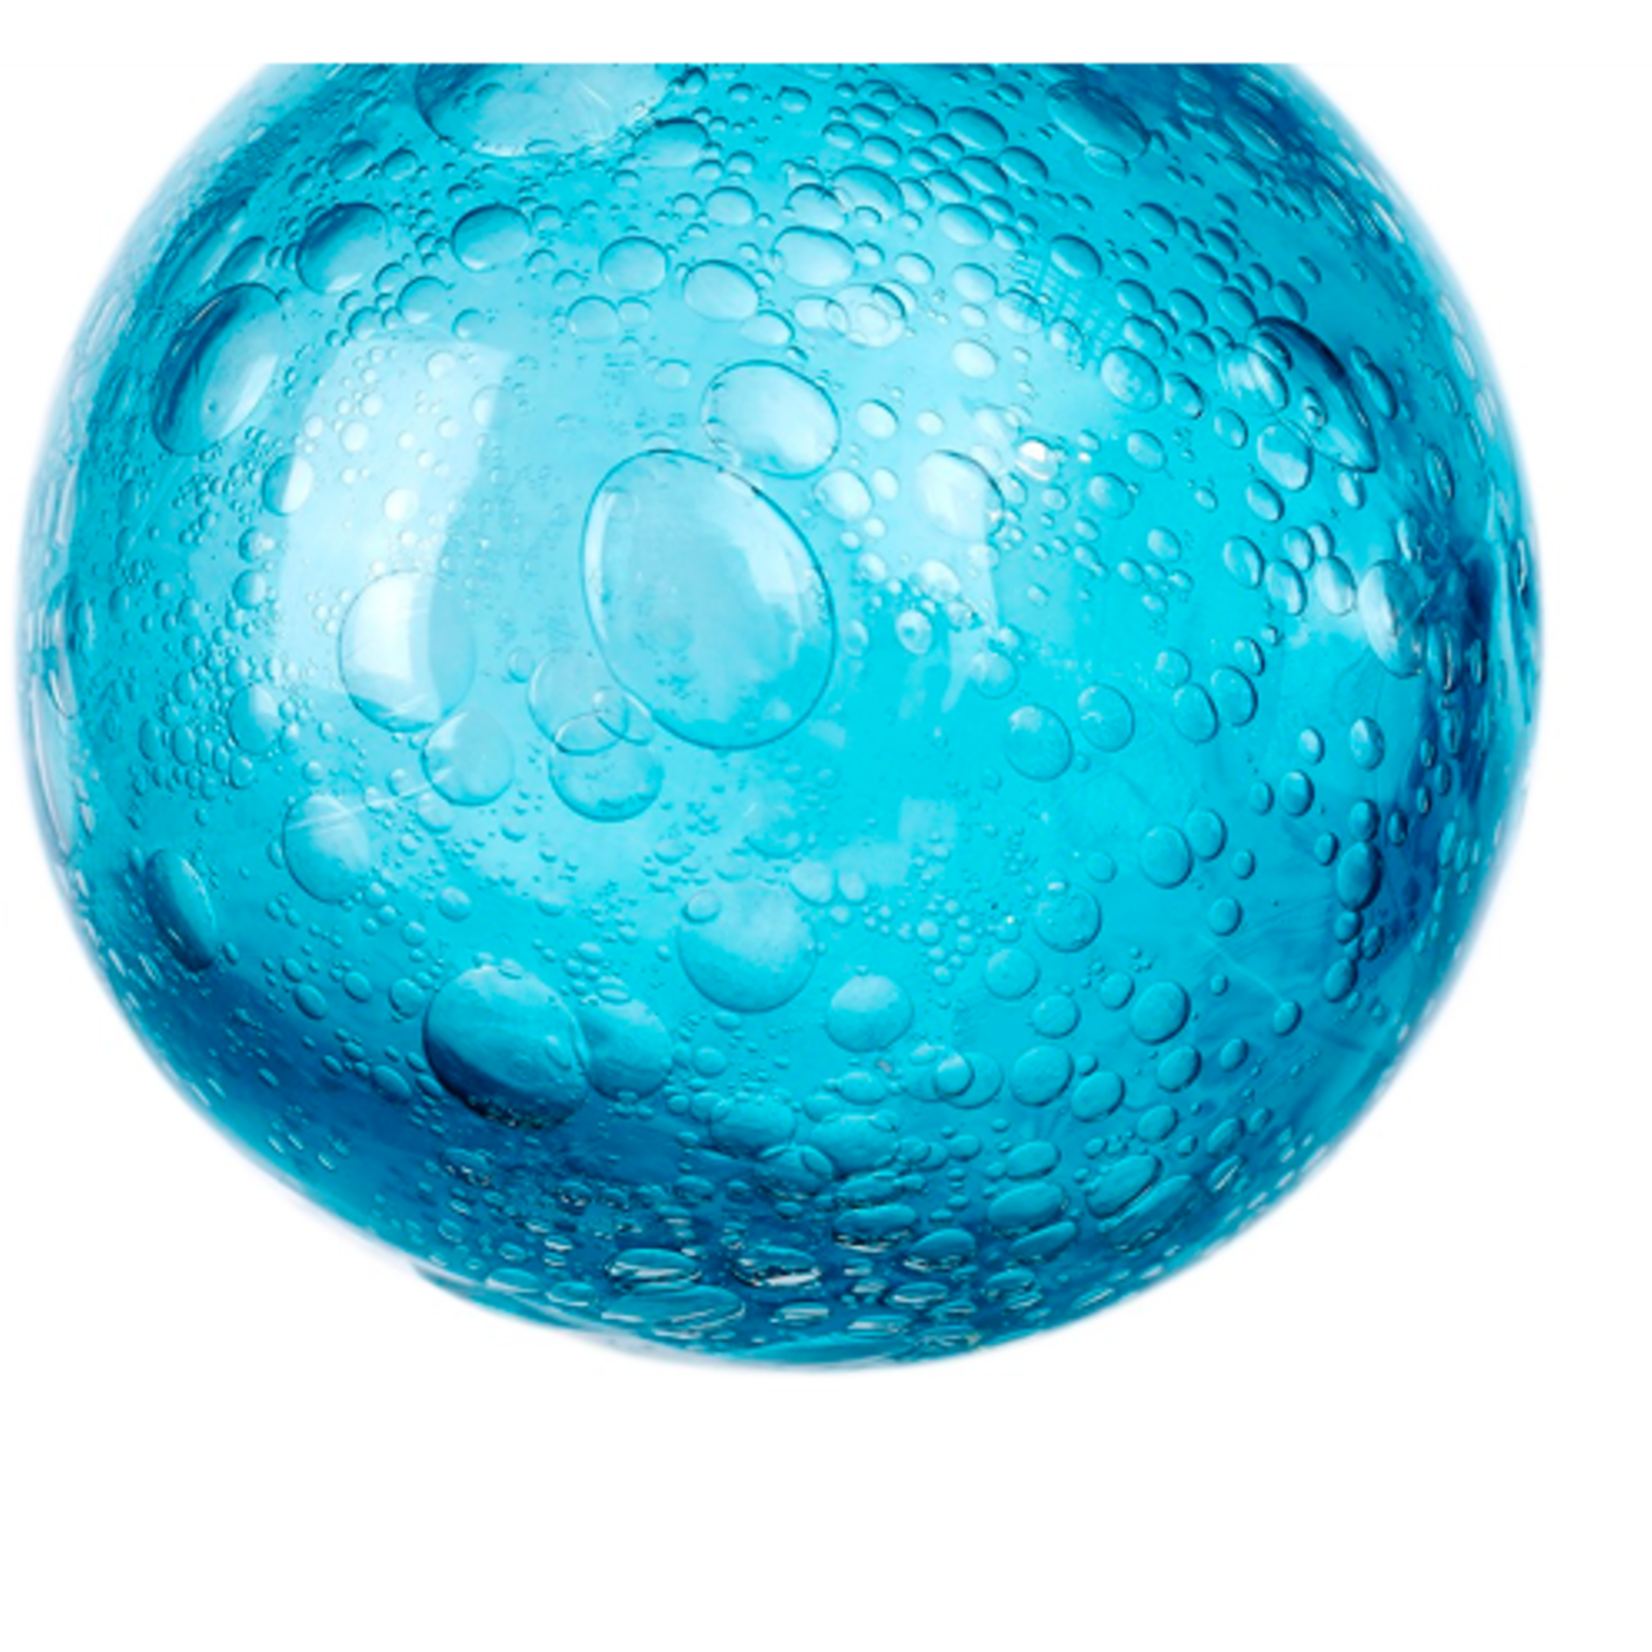 40% off was $10 now $6. 4”D BLUE DECORATIVE GLASS BALL SPHERE